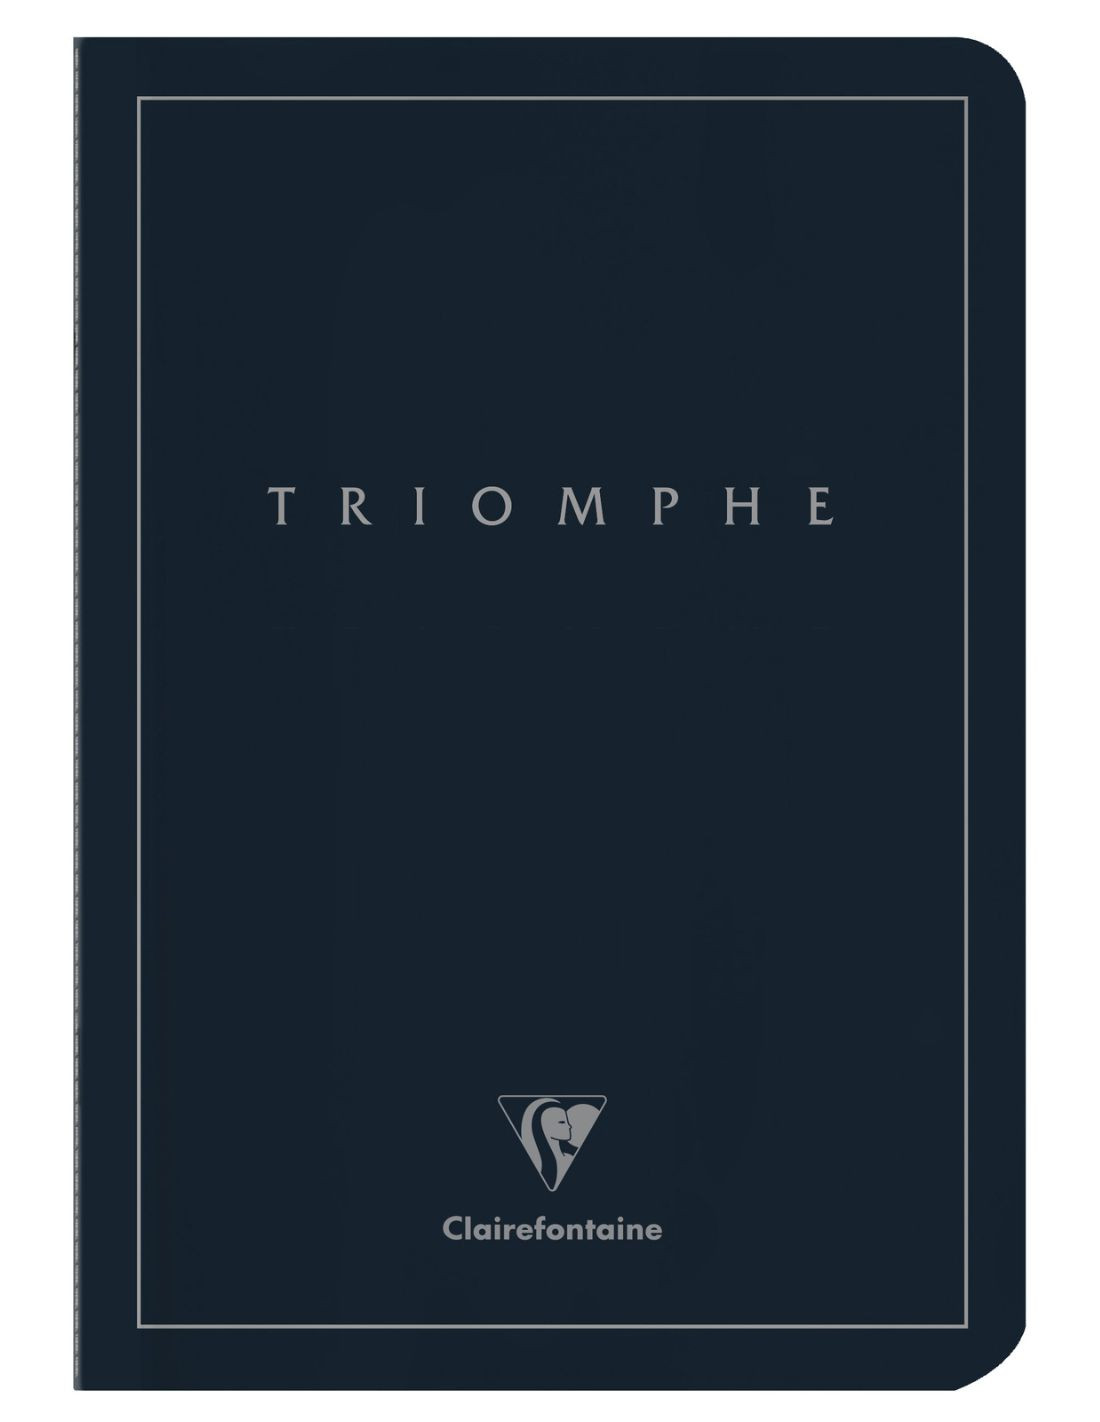 Clairefontaine Triomphe Platinum A4 Blank Notebook